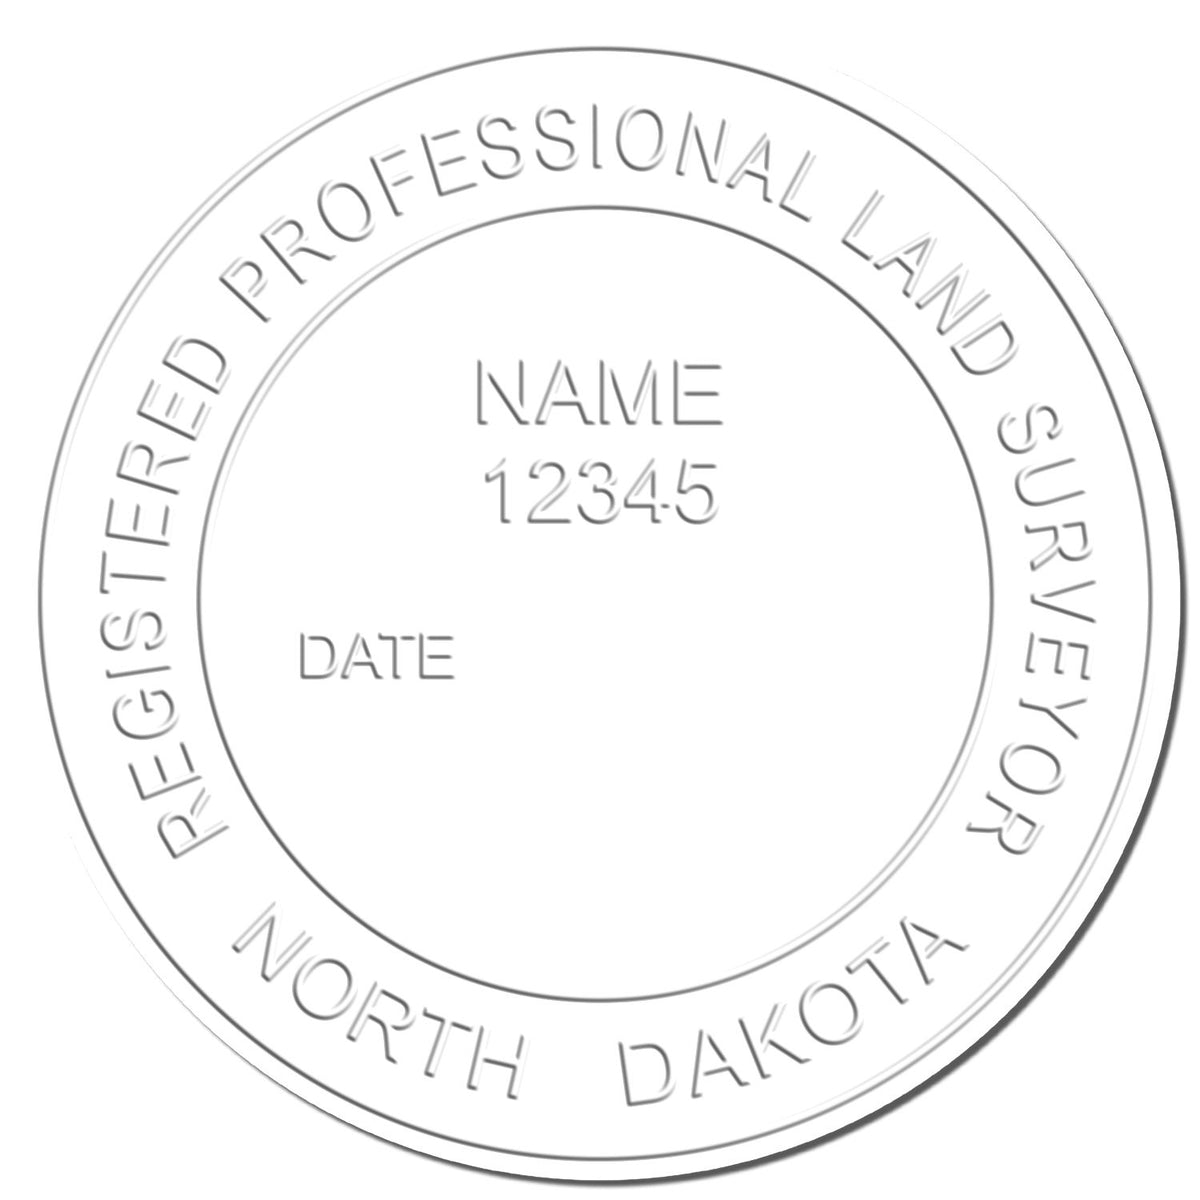 This paper is stamped with a sample imprint of the Hybrid North Dakota Land Surveyor Seal, signifying its quality and reliability.